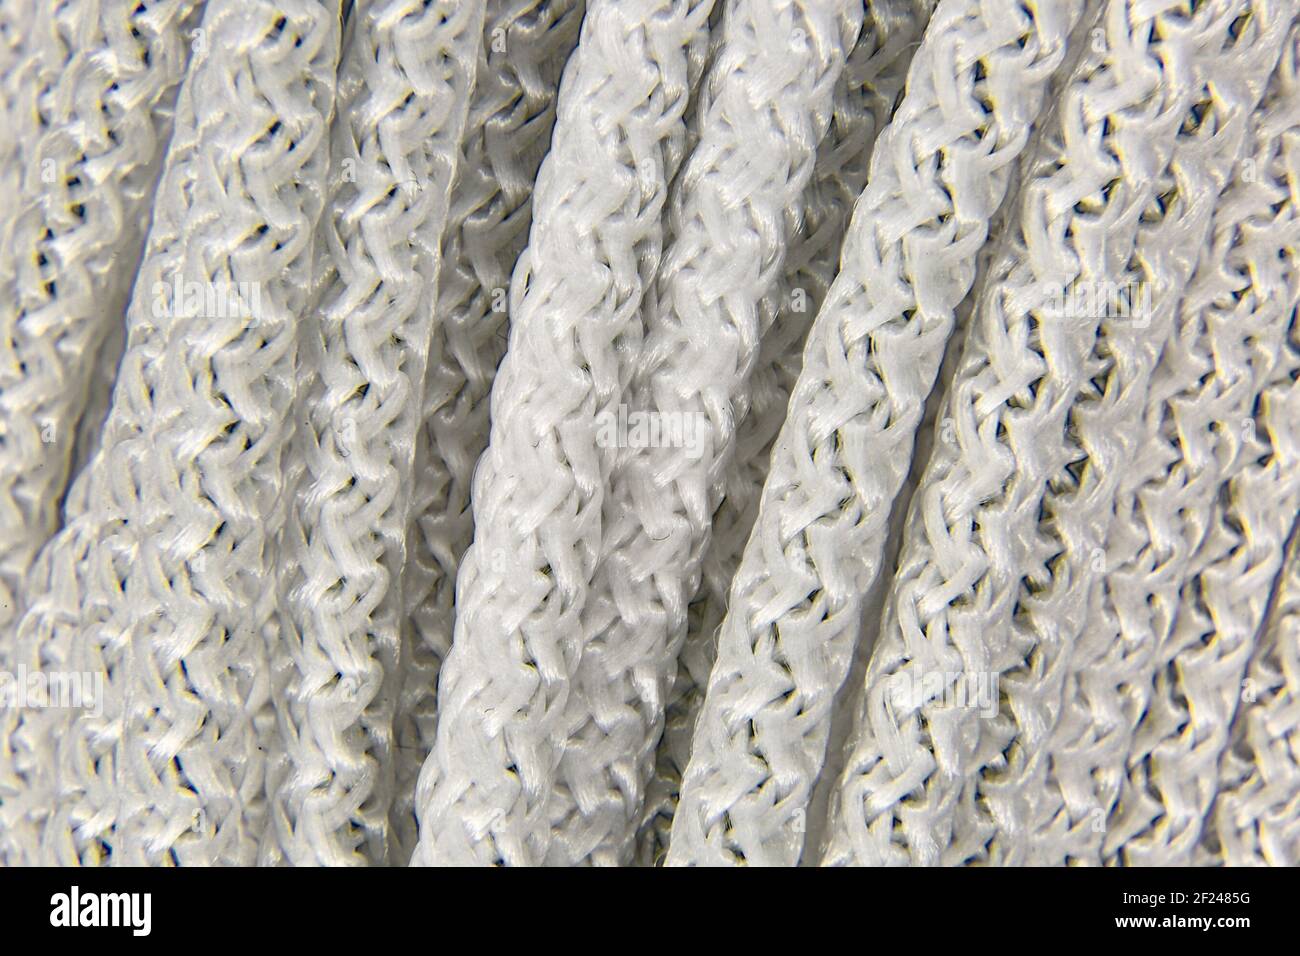 Image background of a piece of white braided rope Stock Photo